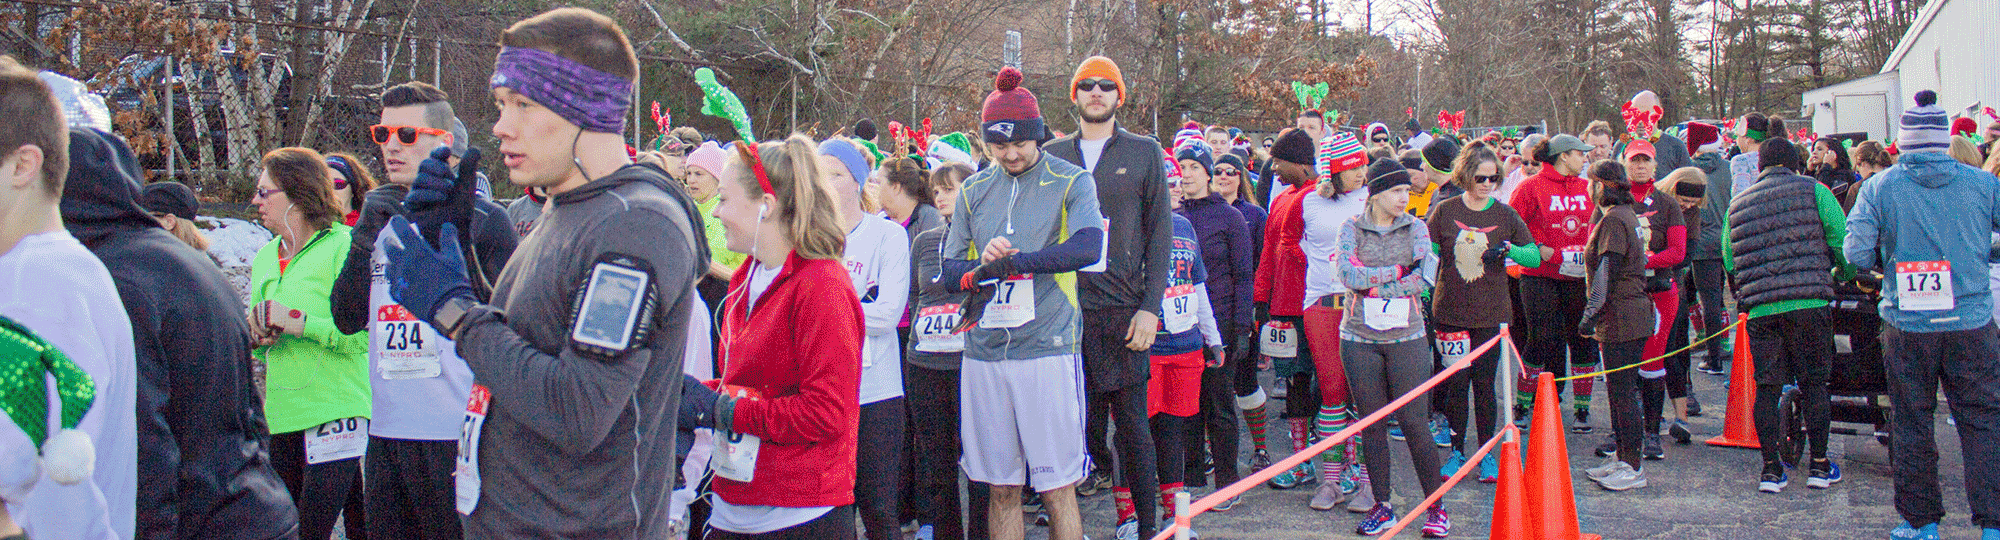 Starting line for the Reindeer Run